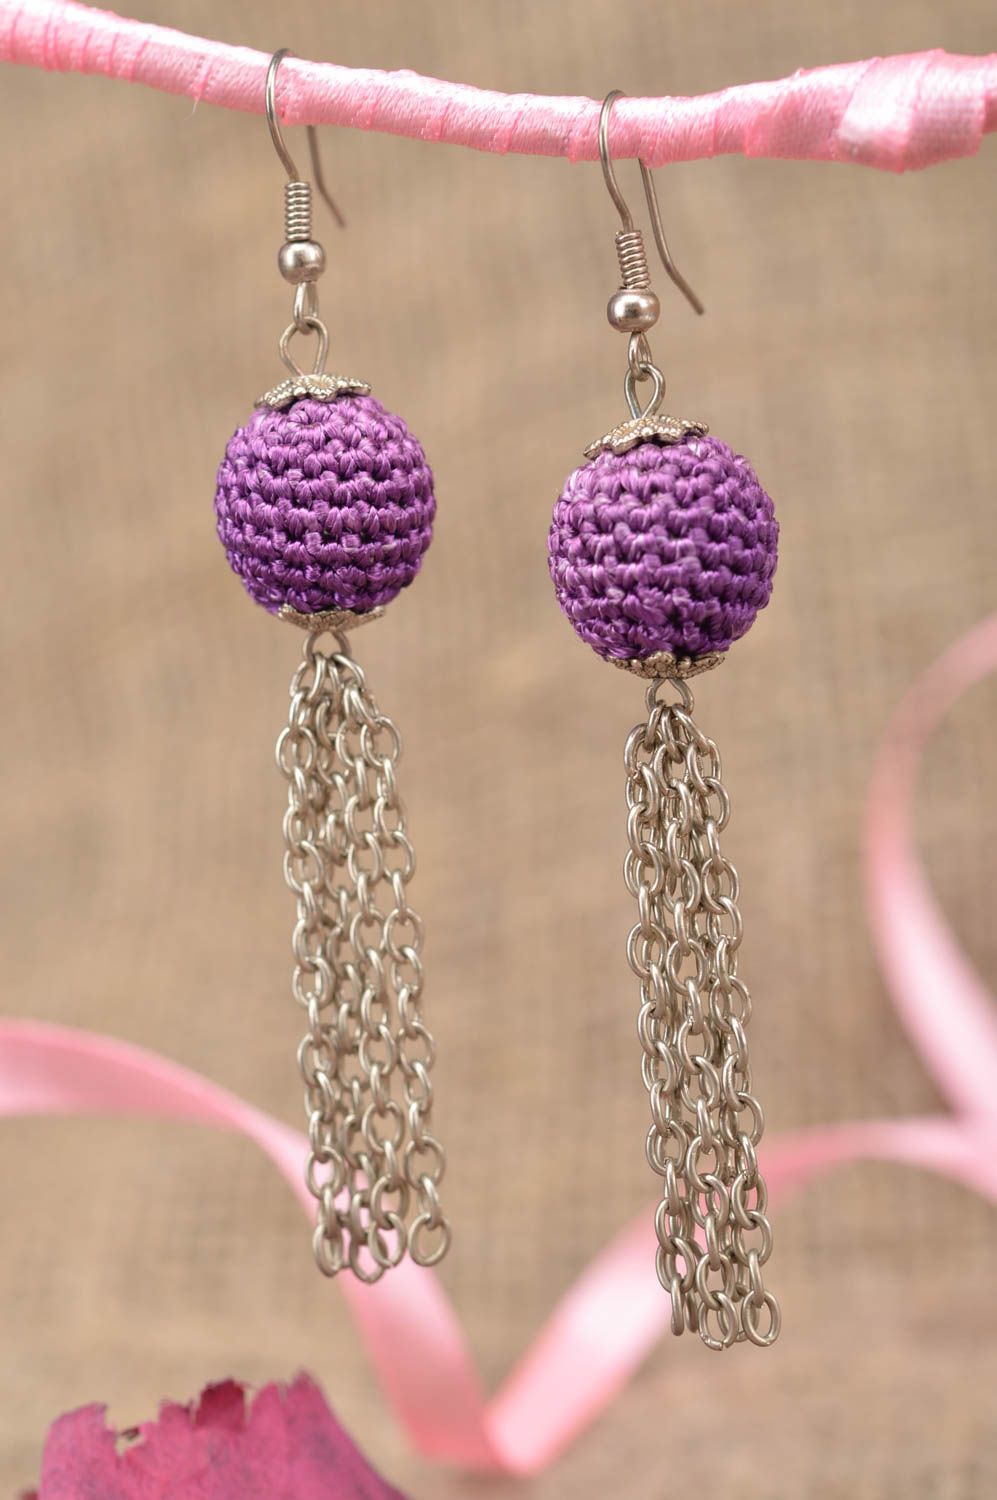 Beautiful homemade design long earrings with lilac crochet over beads and chains photo 1